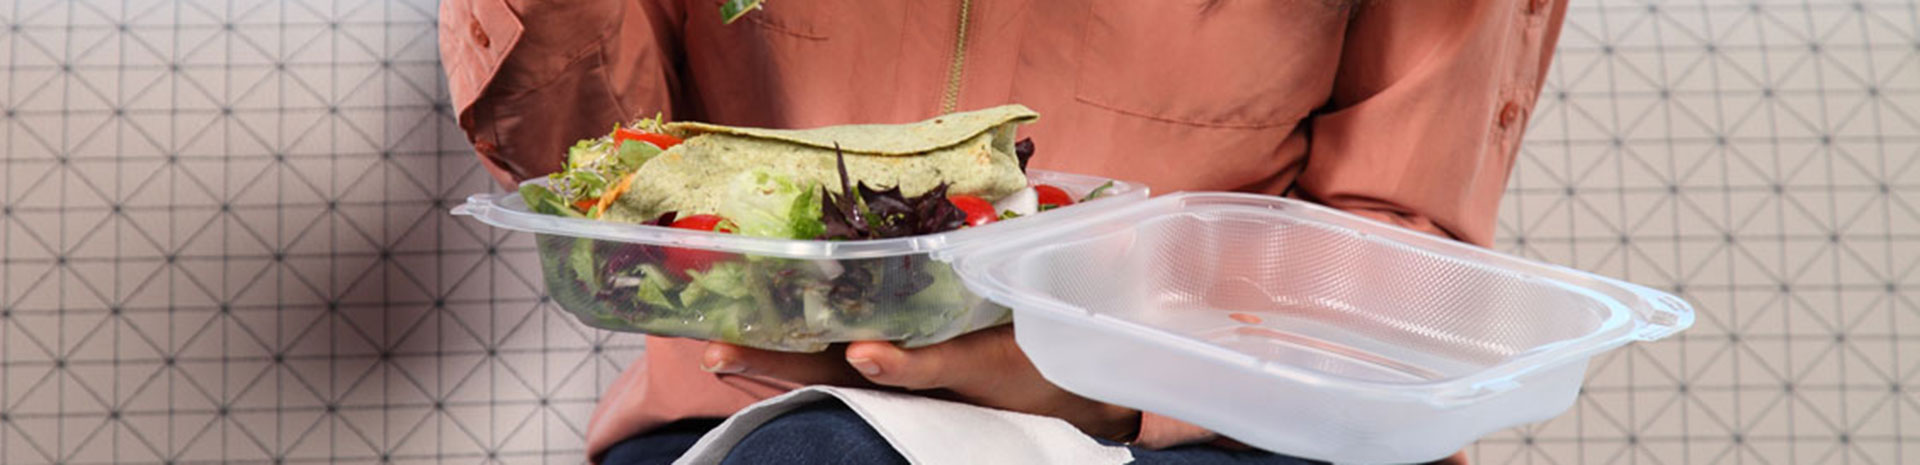 customer eating lunch out of clear hinged food container